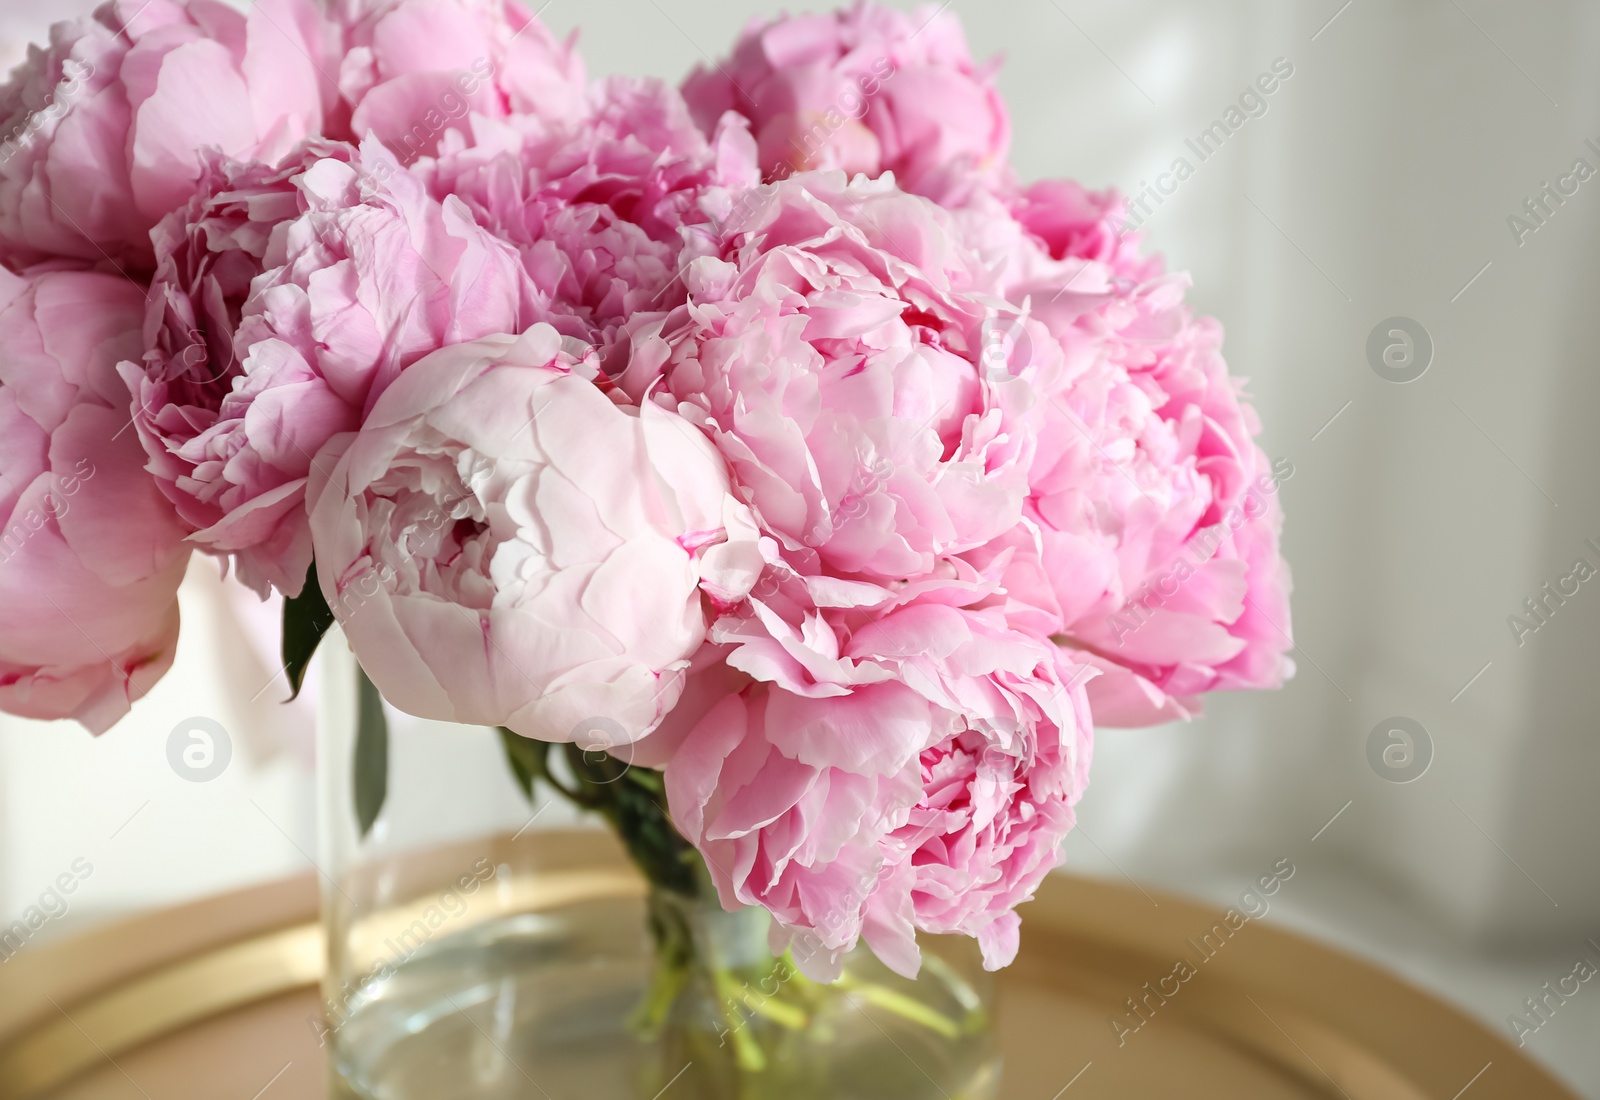 Photo of Bouquet of beautiful peonies on table indoors, closeup